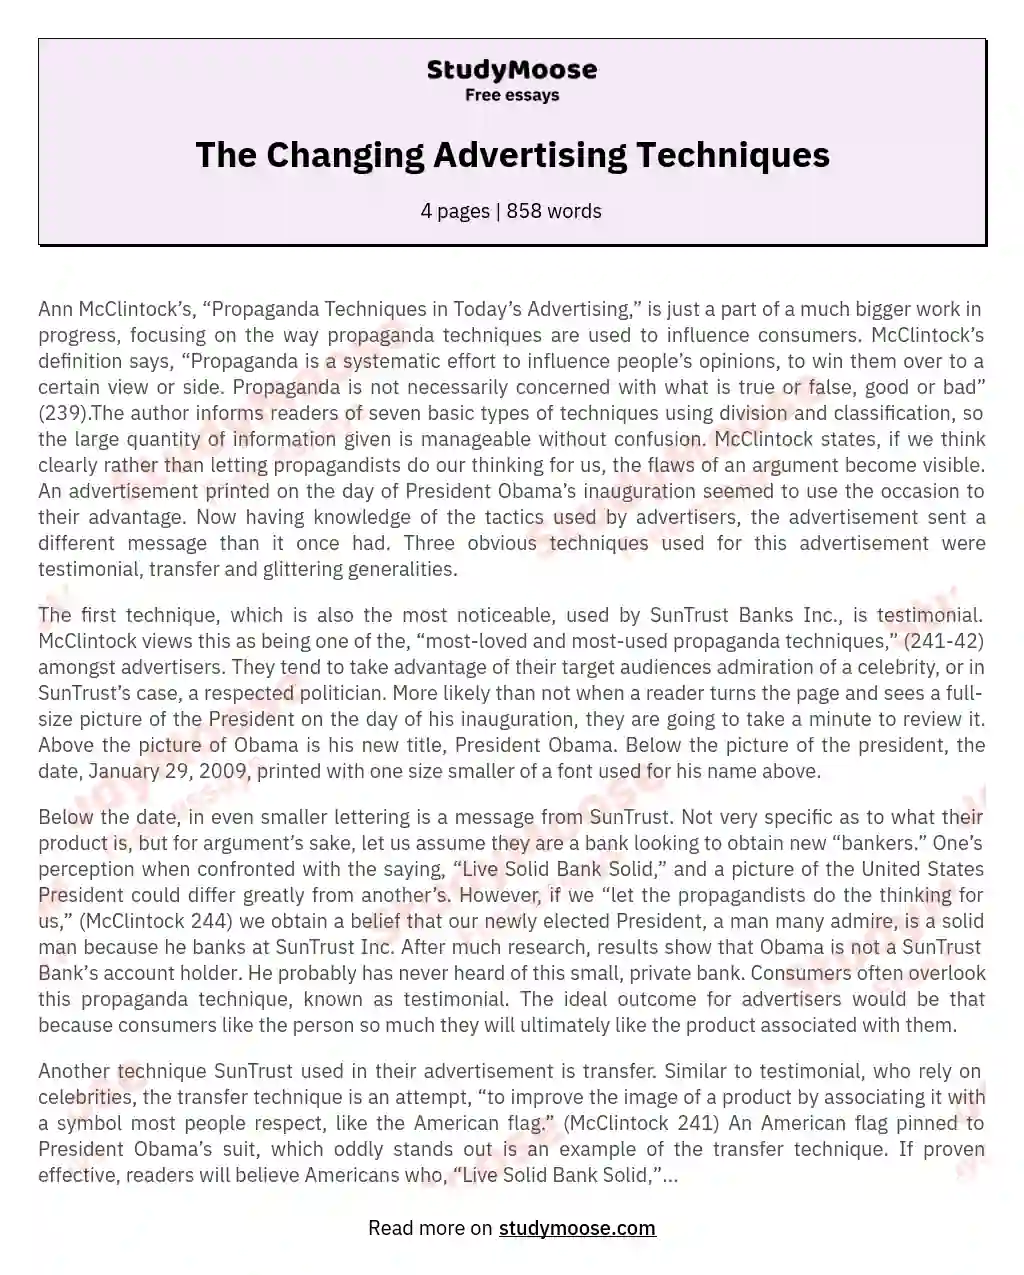 The Changing Advertising Techniques essay